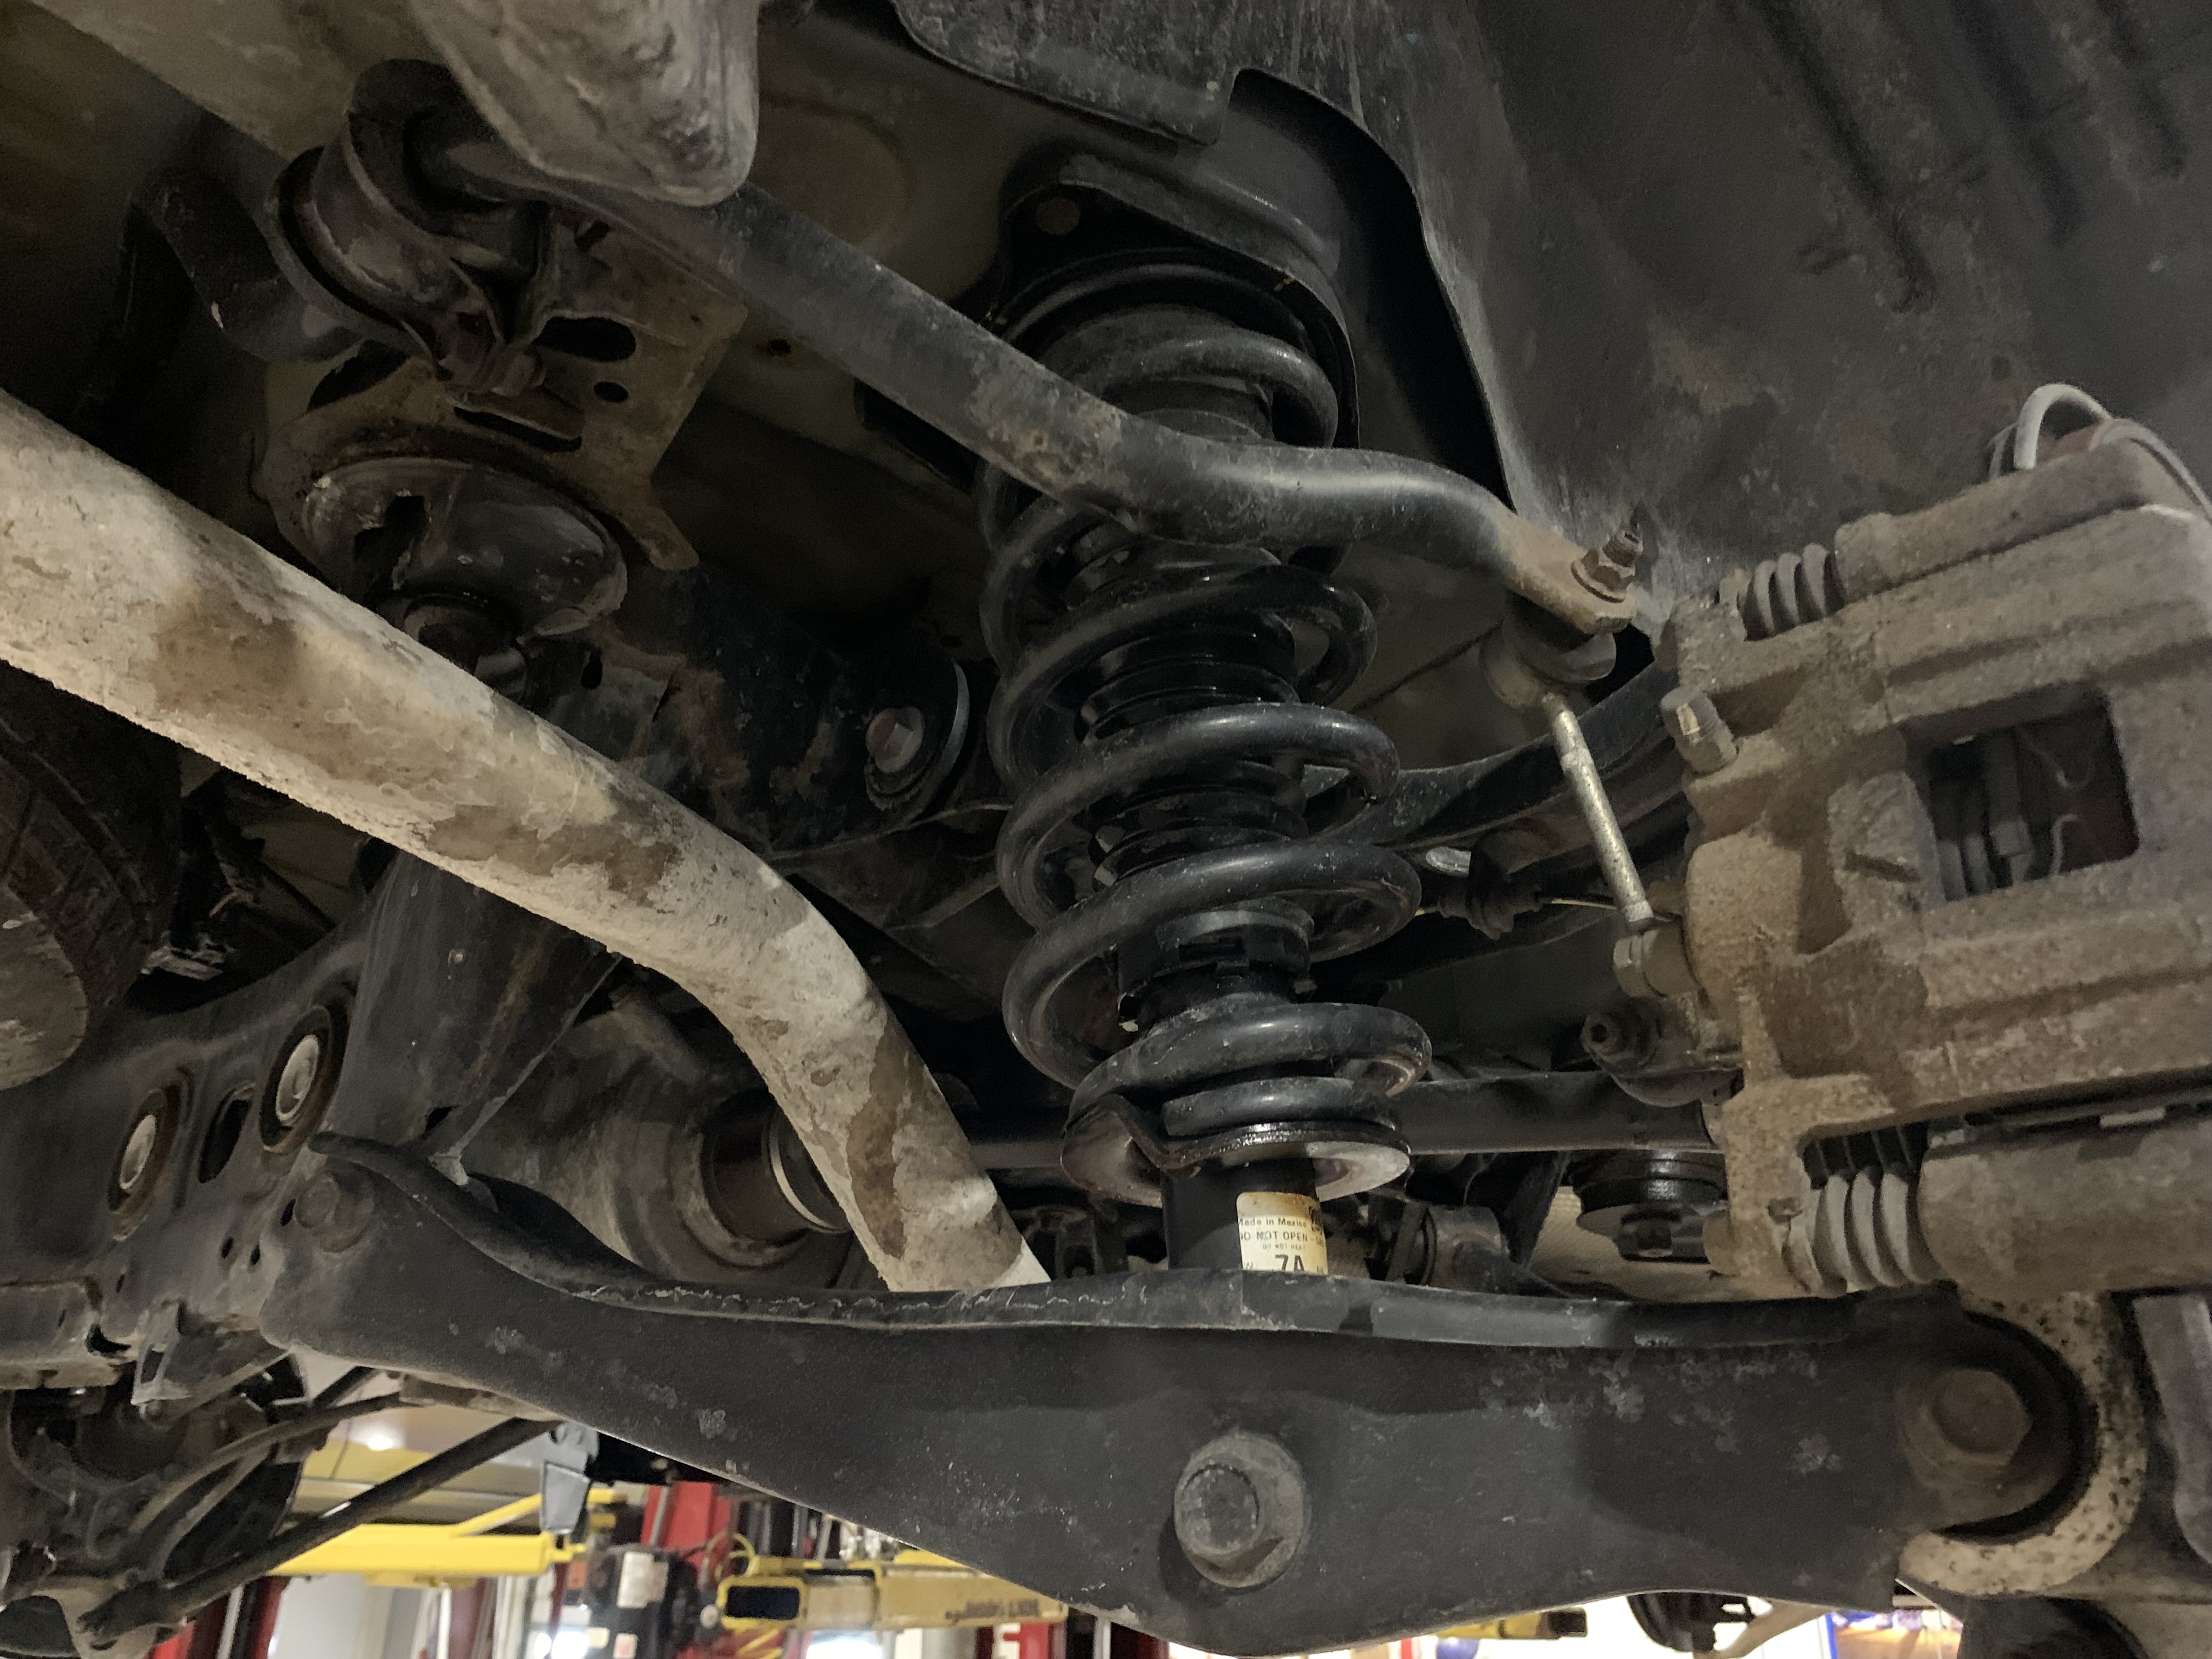 What Are Shock Absorbers vs Struts On A Car?